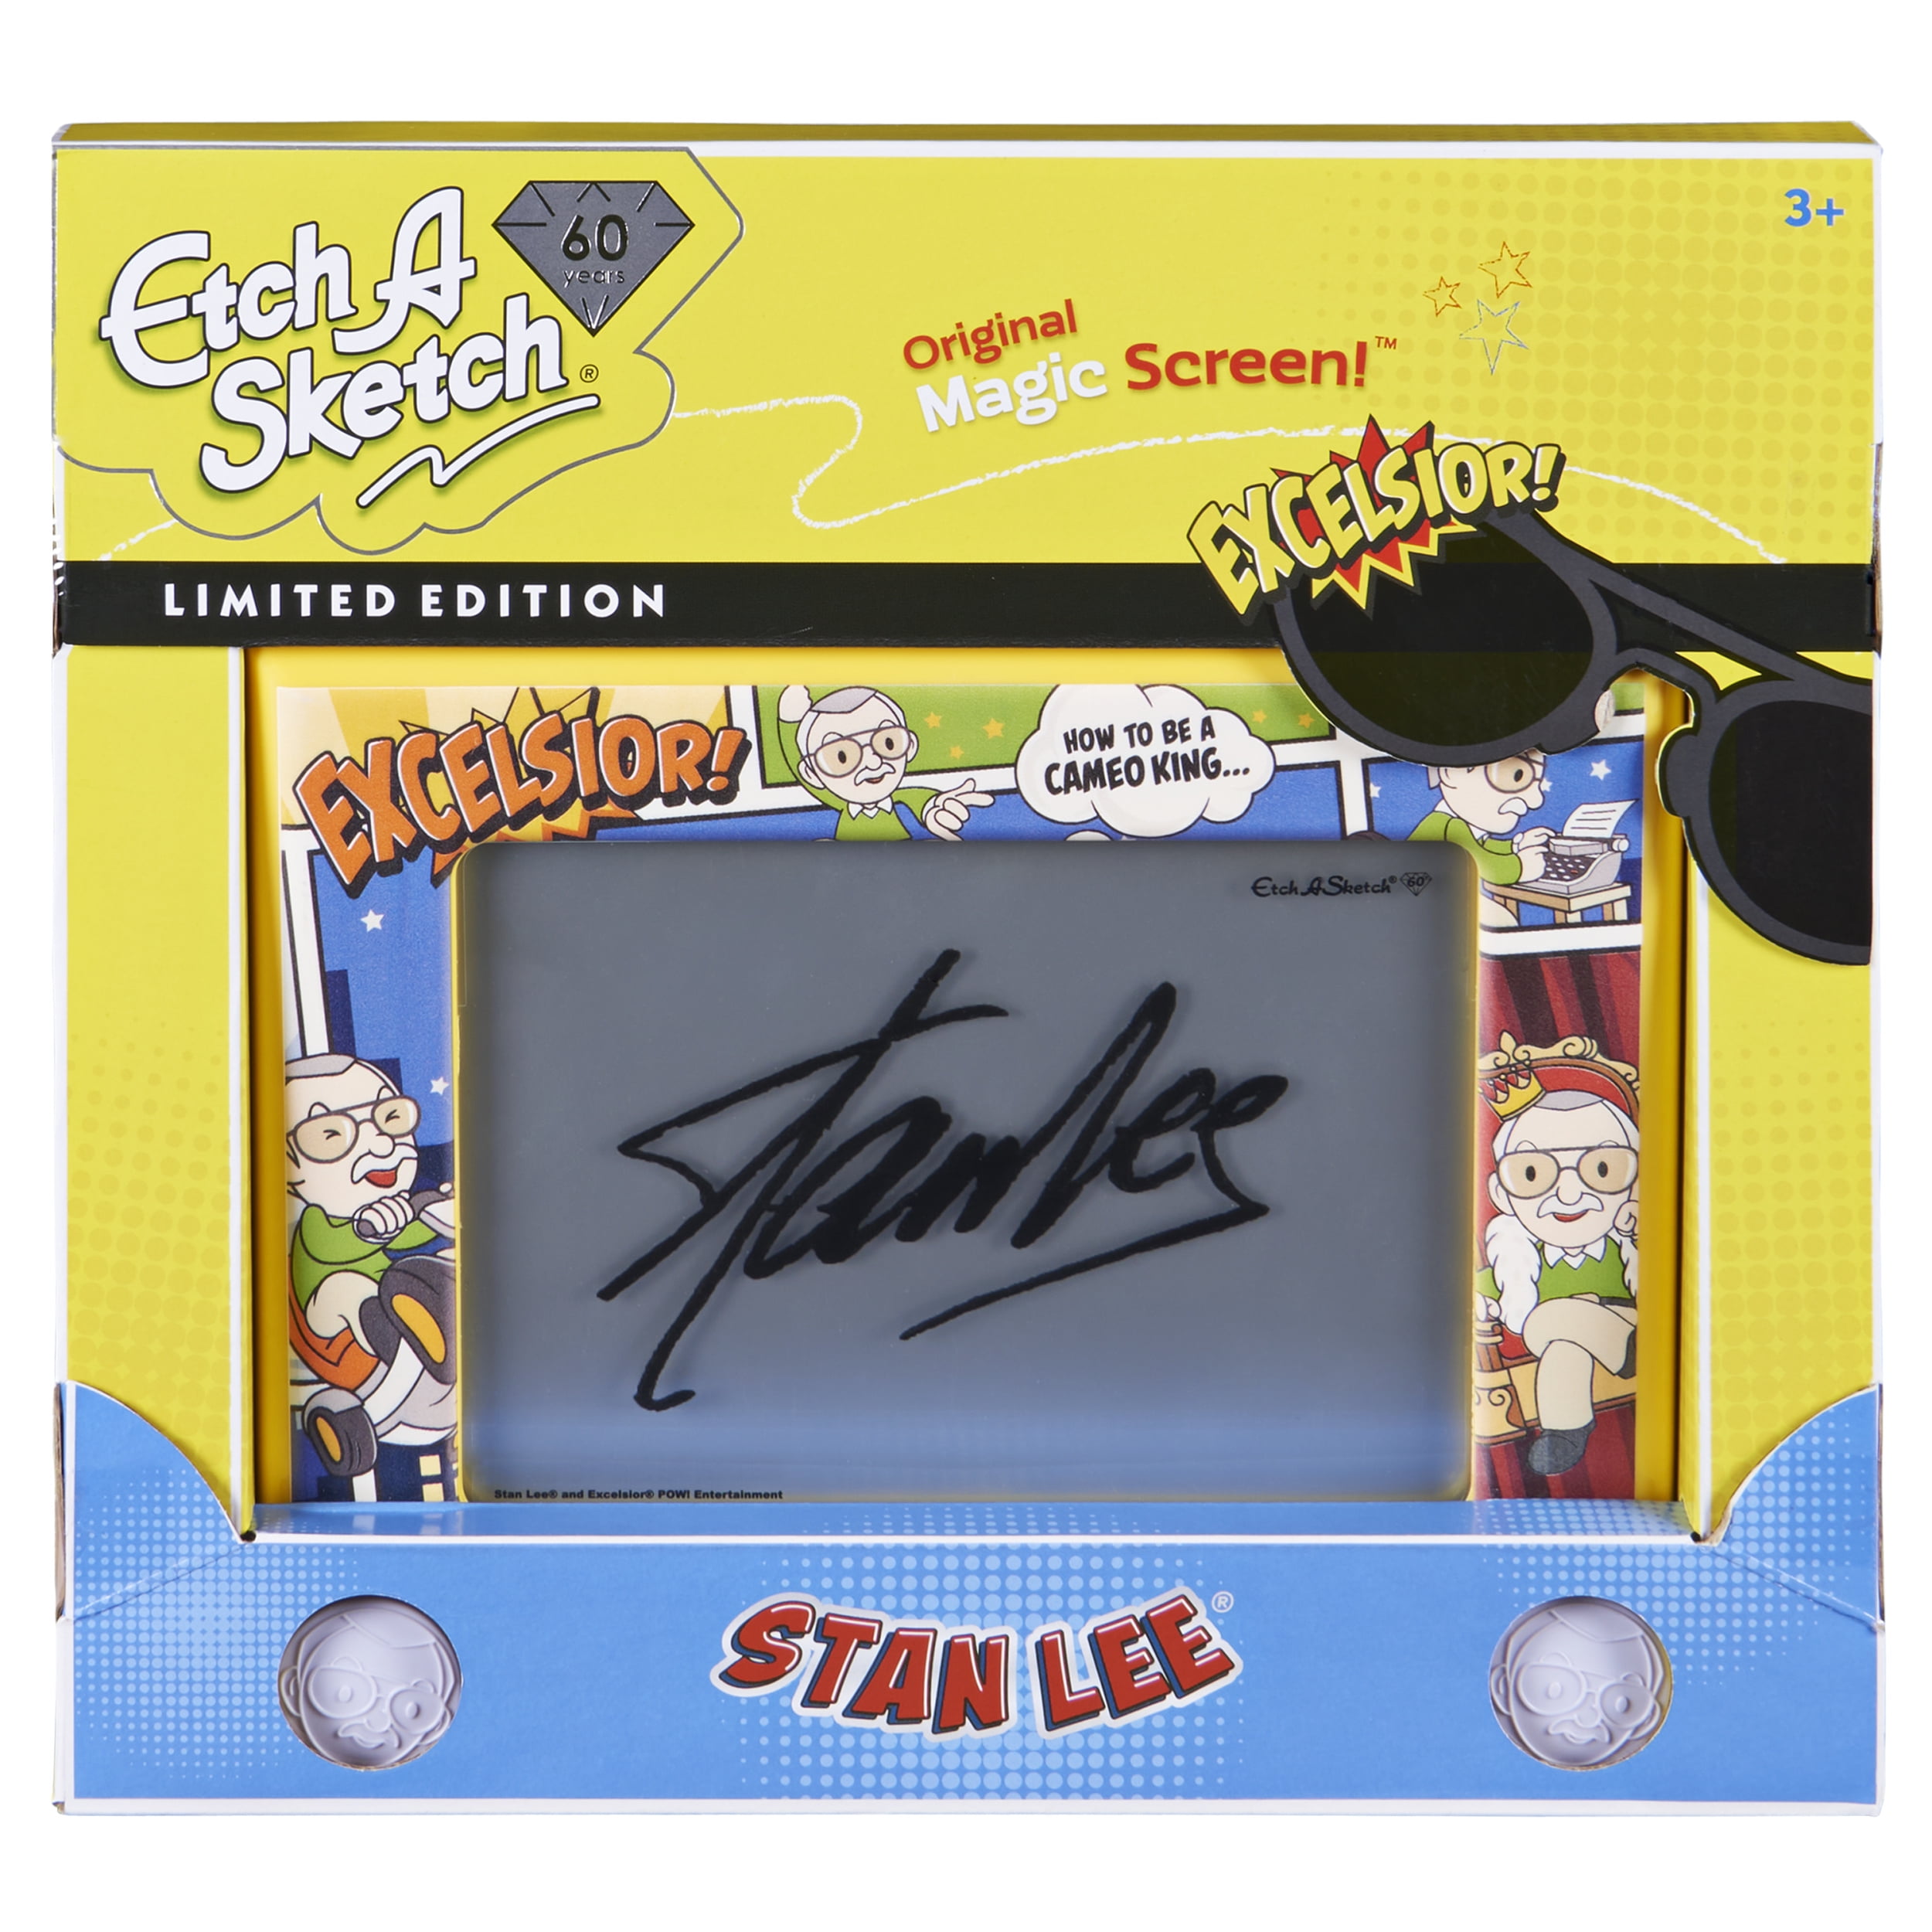 How Does An Etch A Sketch Work, Anyway?